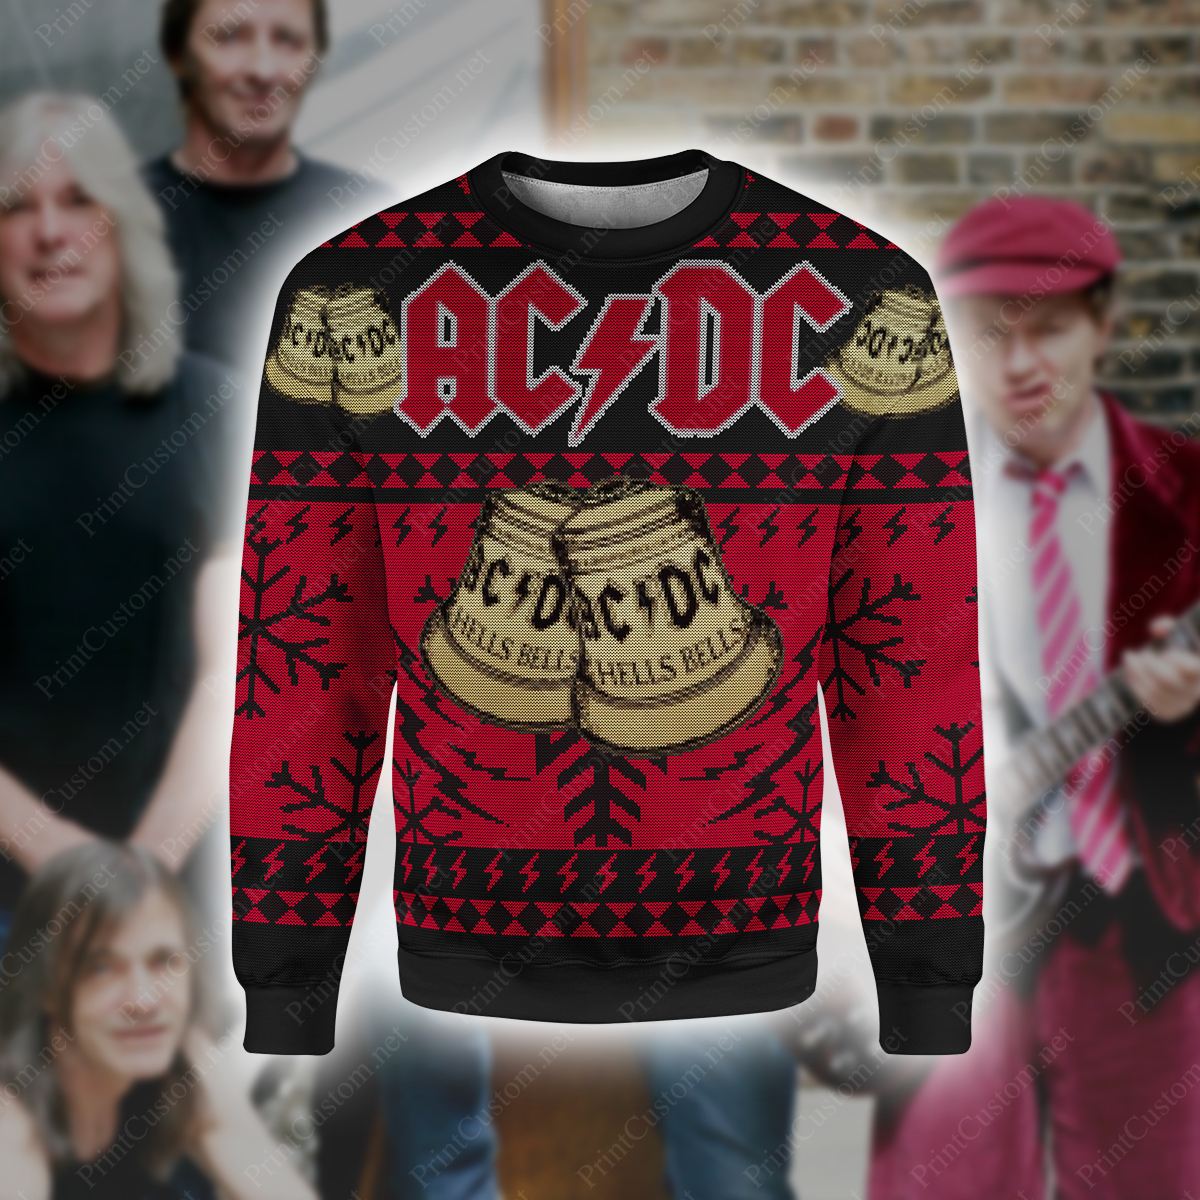 ACDC hells bells full printing ugly christmas sweater 1